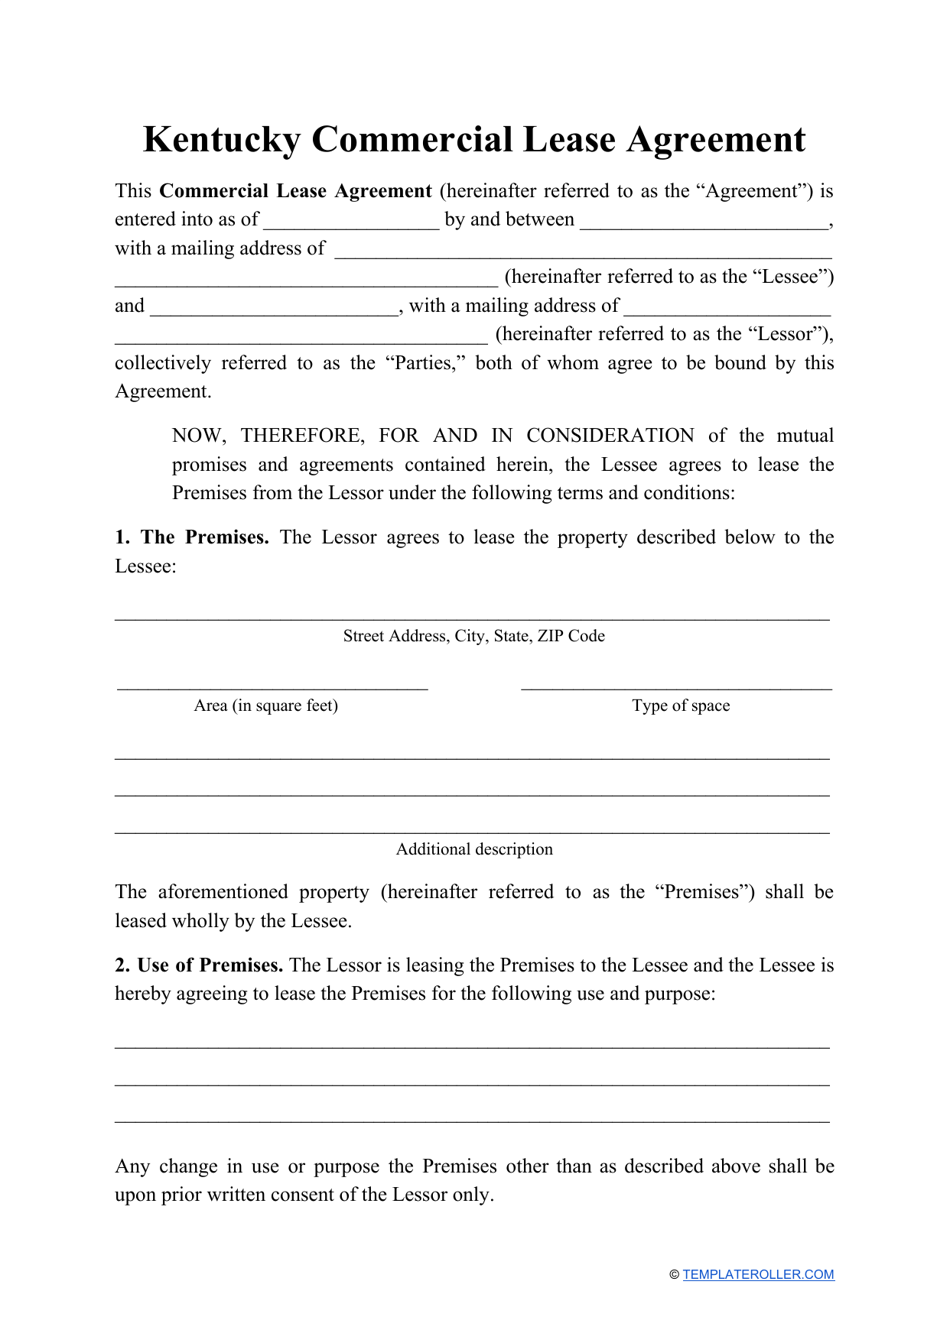 Commercial Lease Agreement Template - Kentucky, Page 1